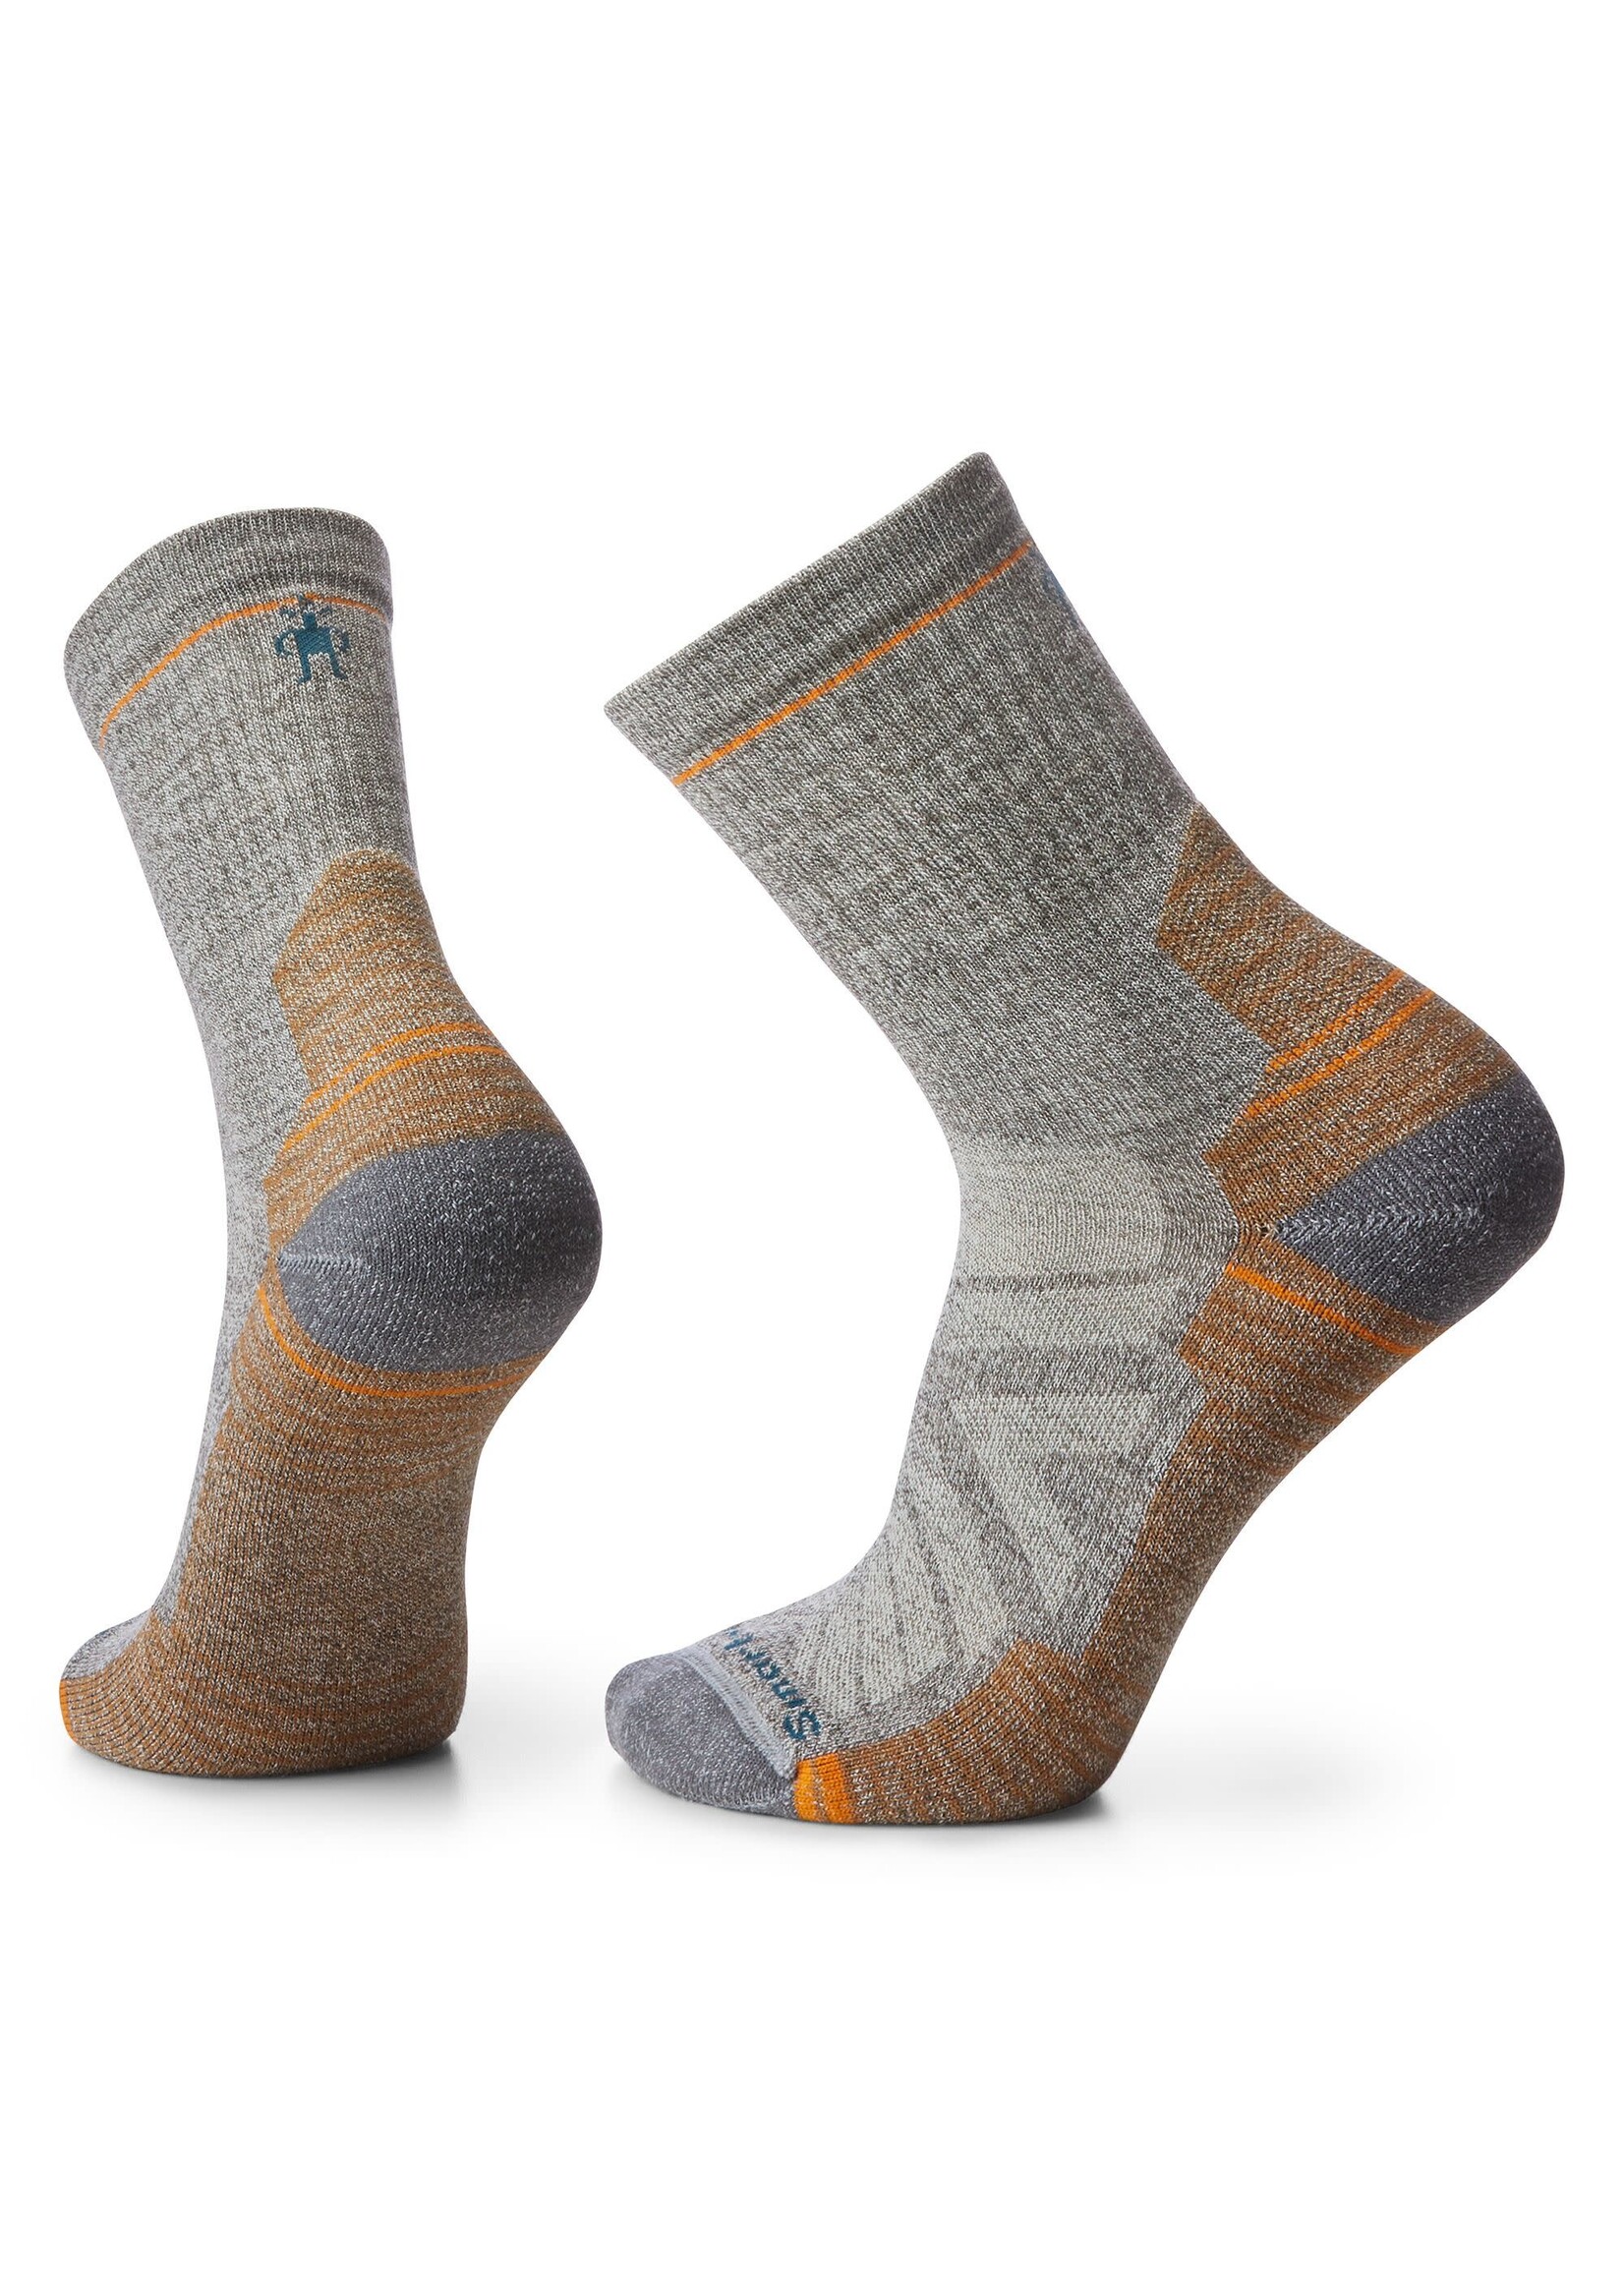 Smartwool Chaussette Smartwool Hike Light Mid Crew - Homme